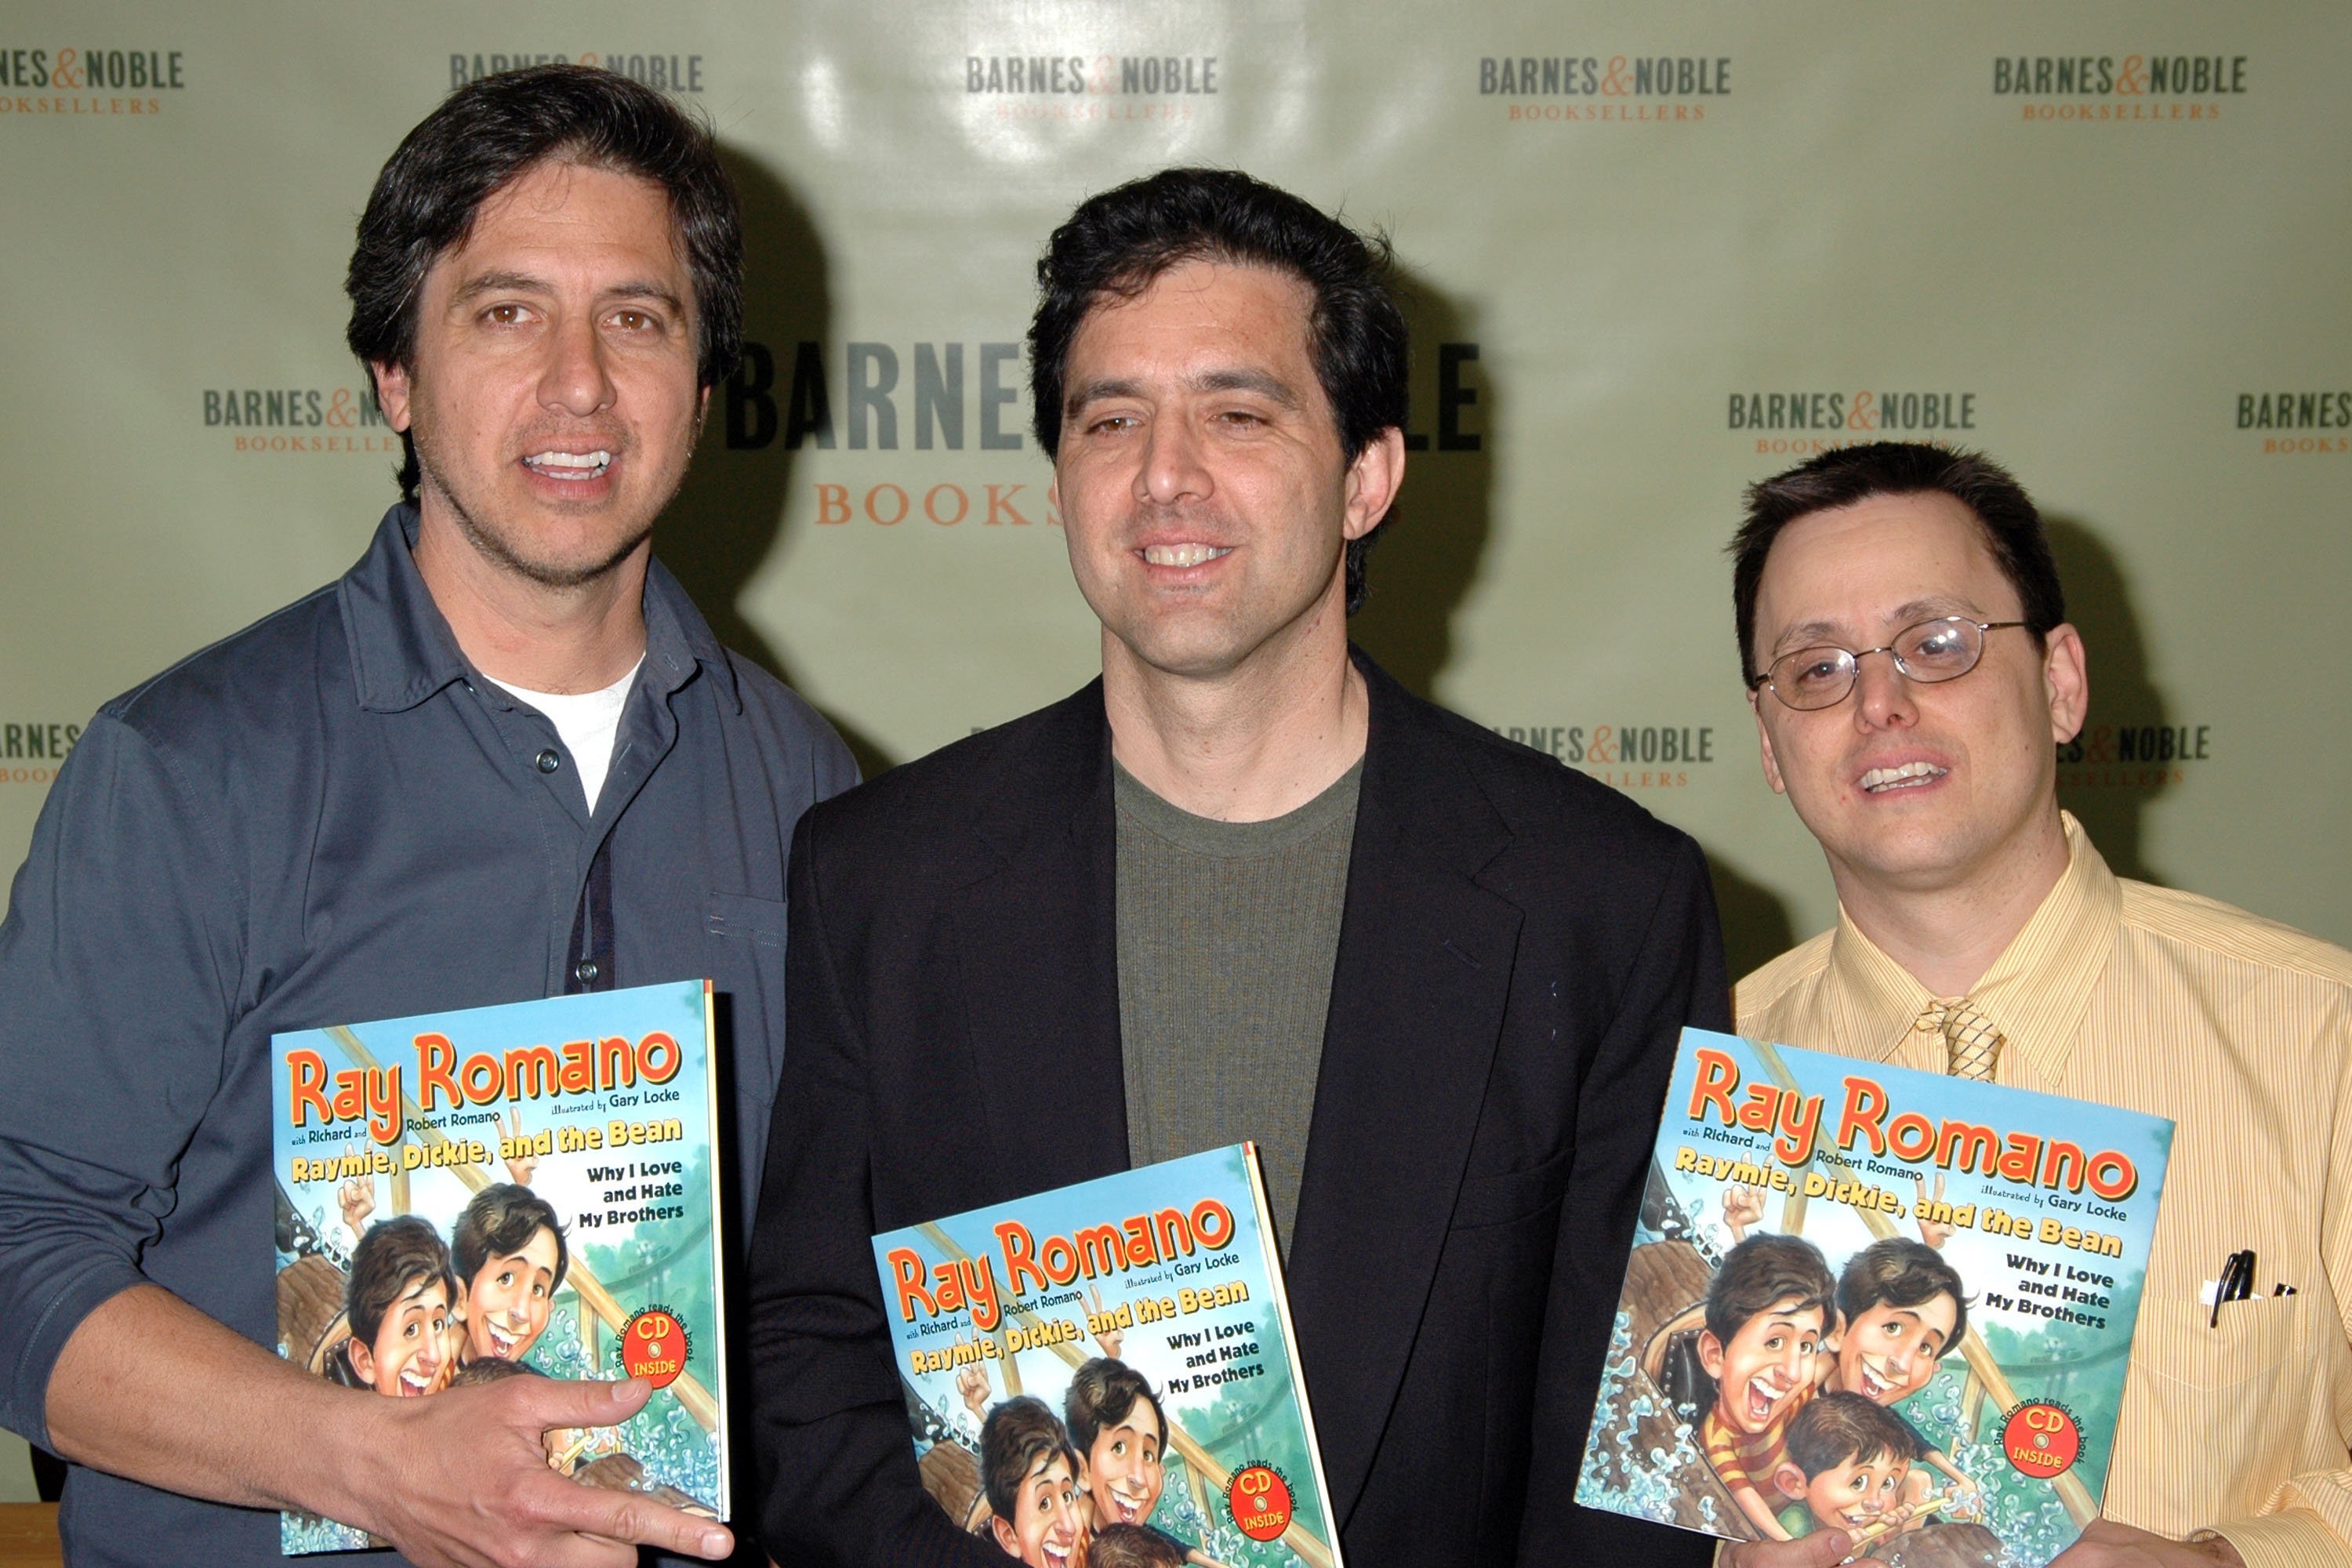 Ray Romano, Richard Romano, and Robert Romano together at Barnes and Nobles for the signing of children's book